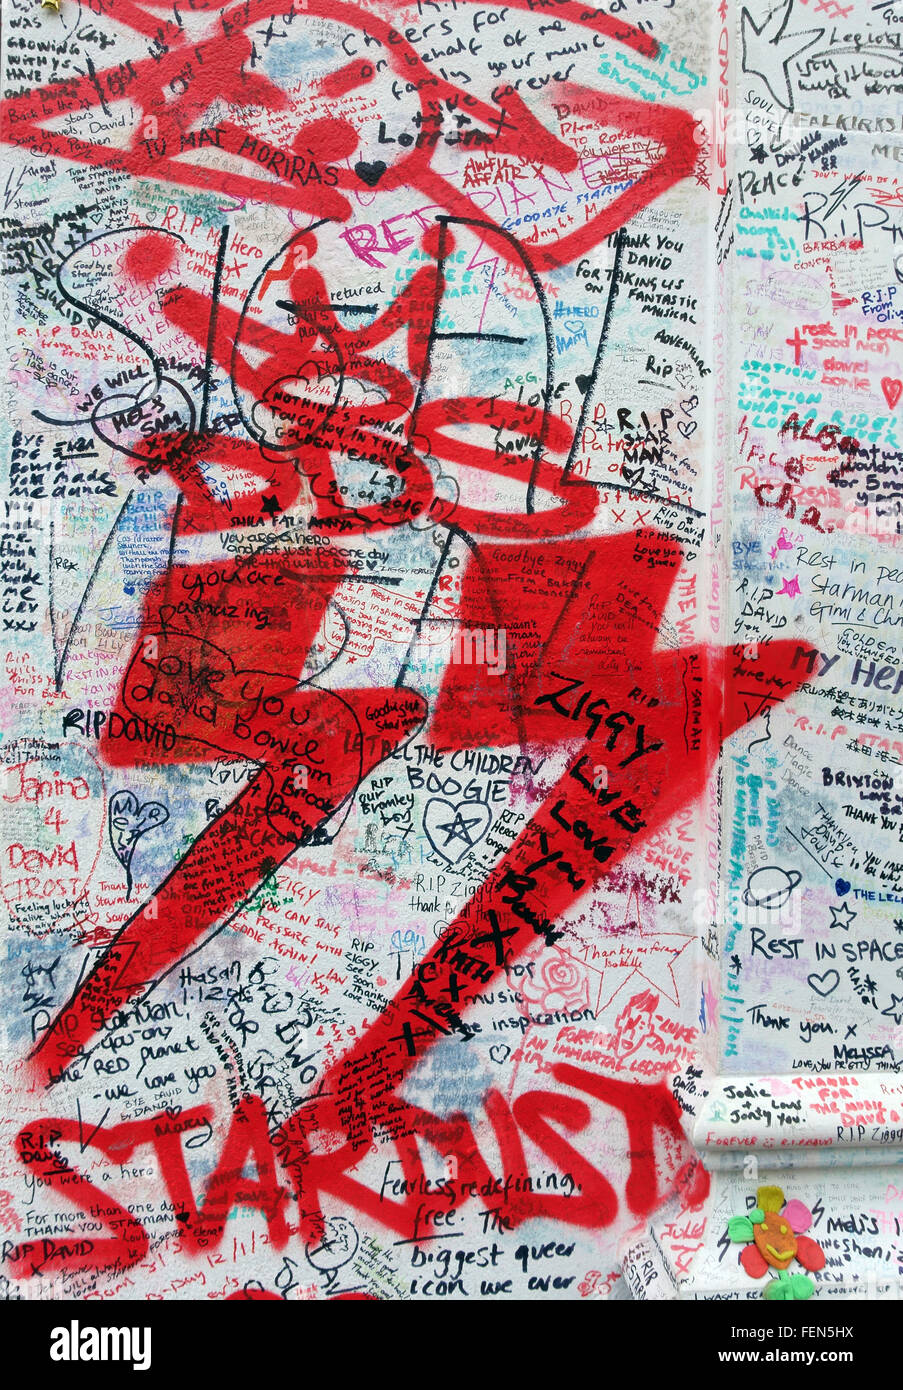 David Bowie graffito in Brixton, London has become a shrine since his death Stock Photo